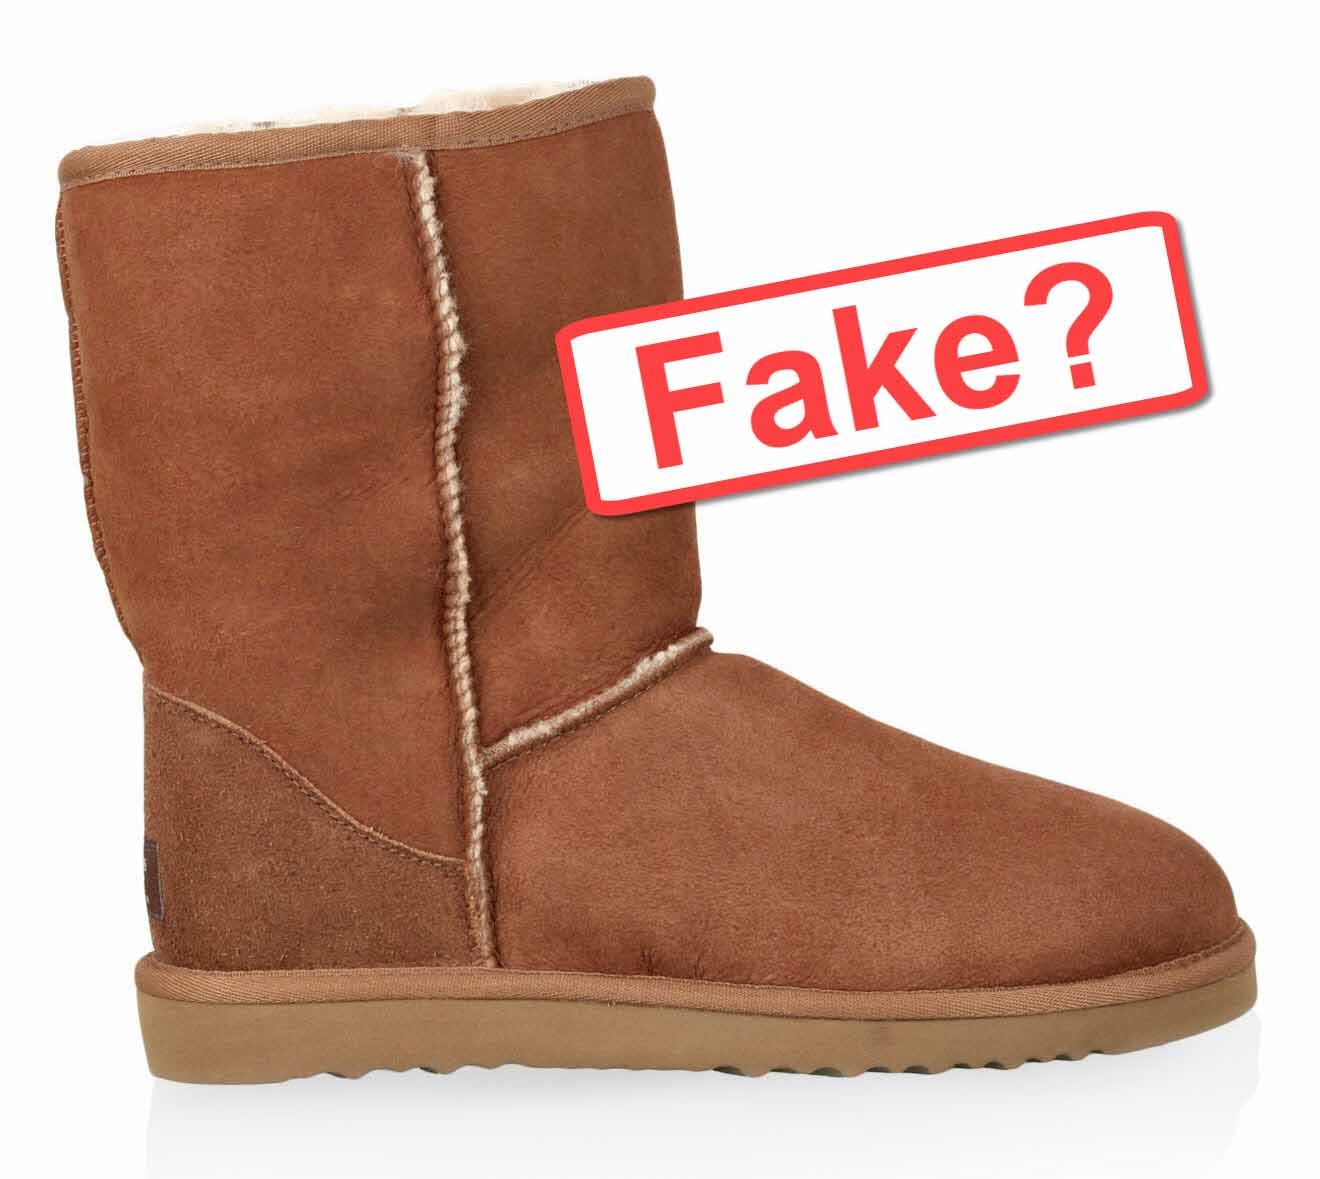 verifz if ugg boots are 